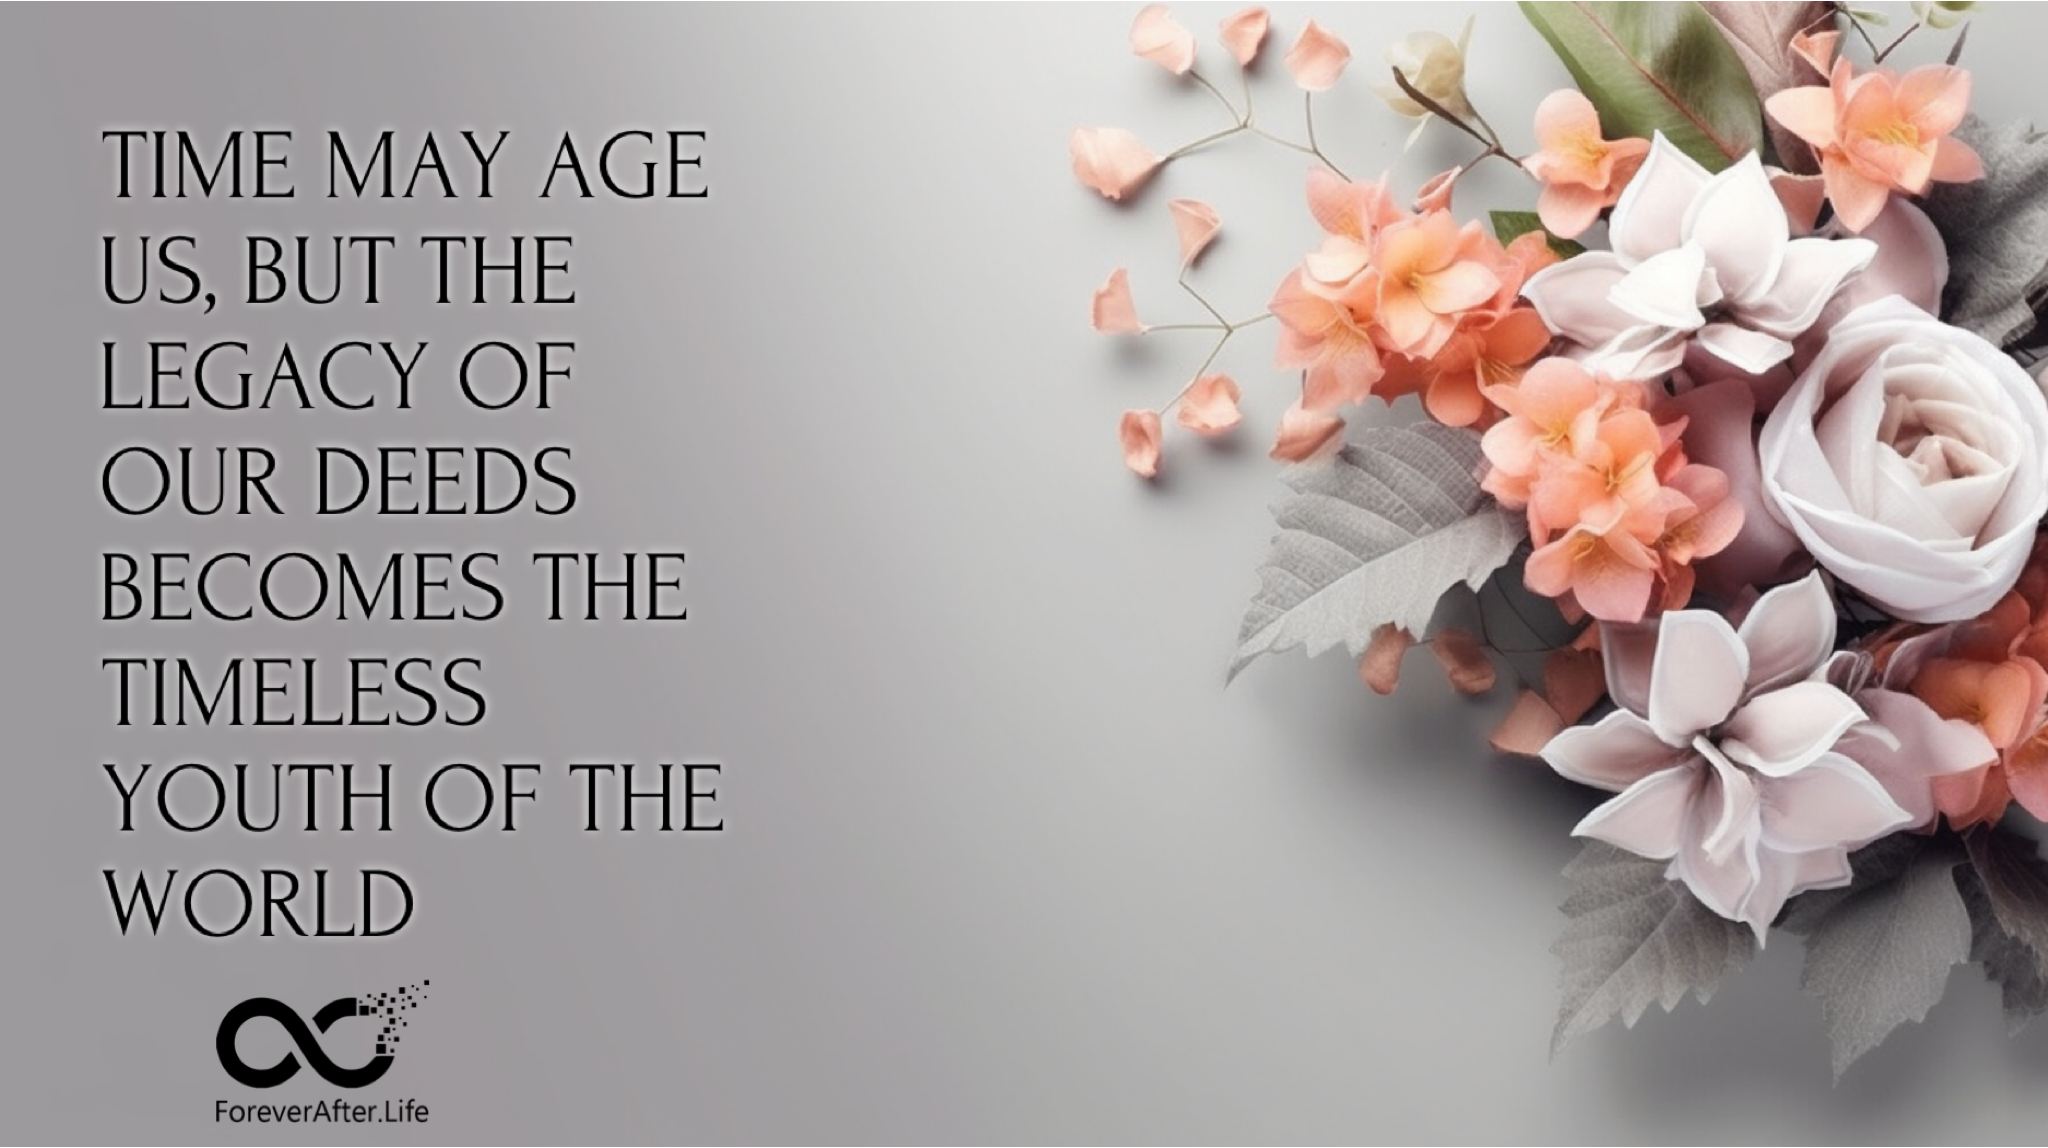 Time may age us, but the legacy of our deeds becomes the timeless youth of the world